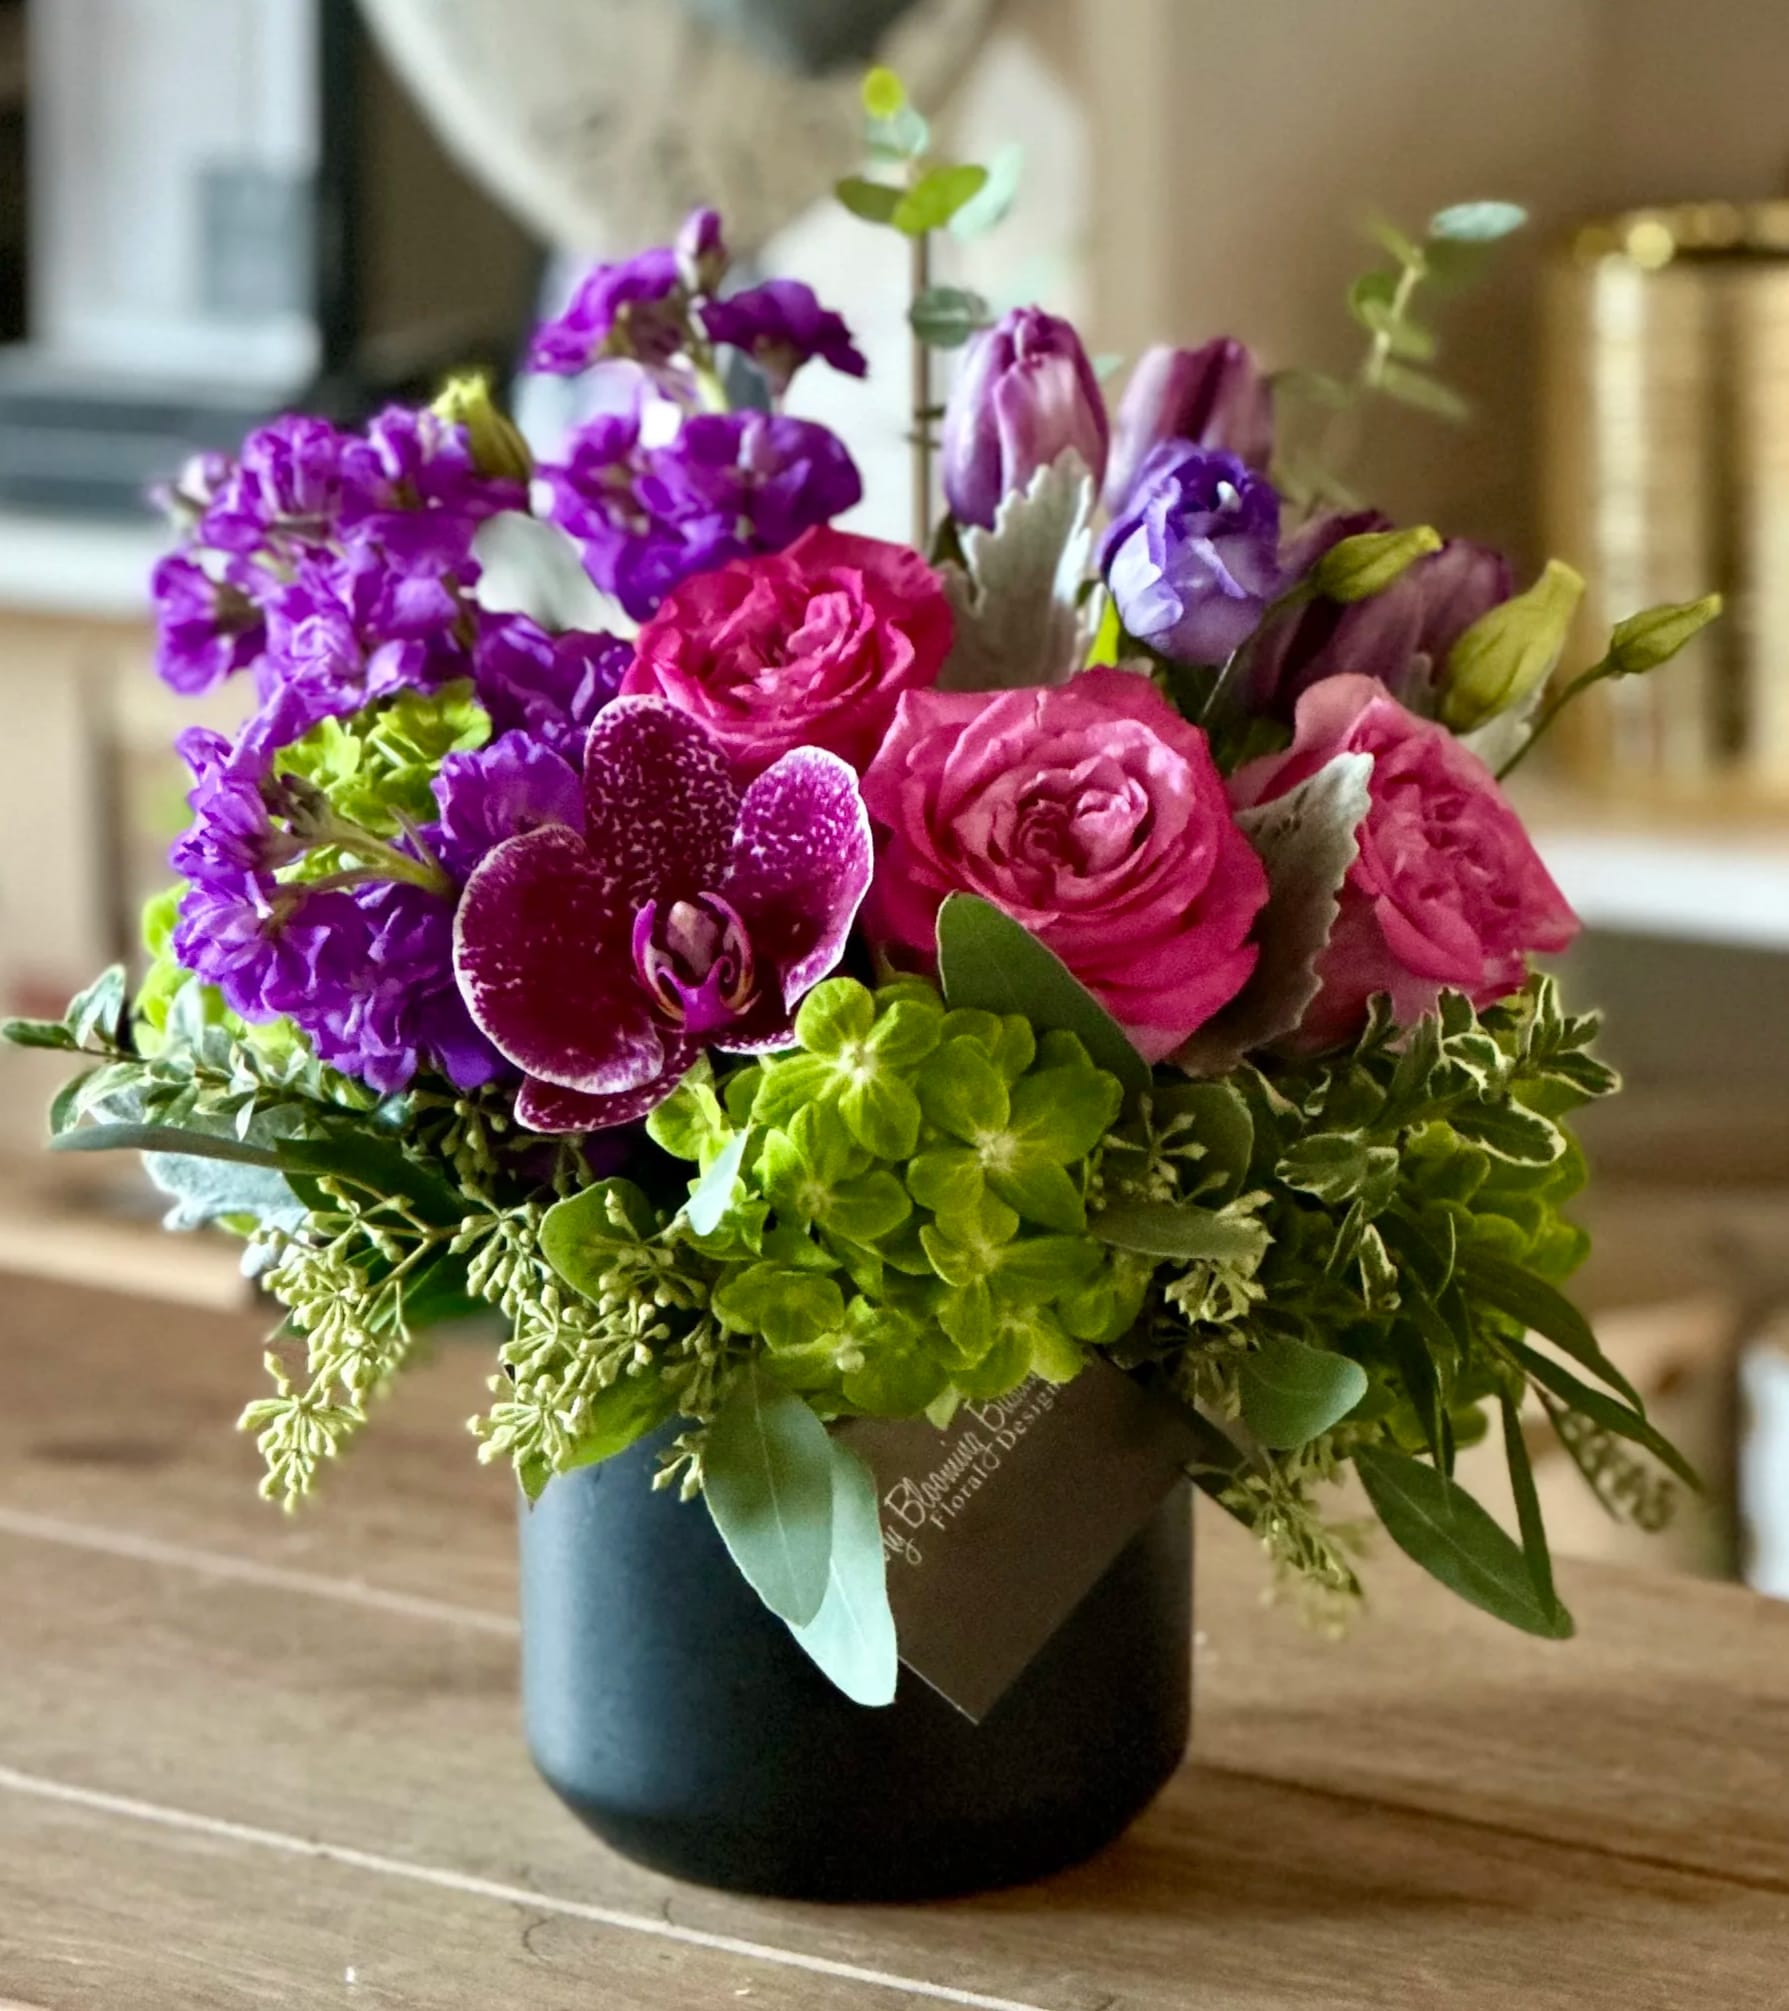 Xiomara - Introducing Xiomara, the stunning floral arrangement that is poised to captivate your family and friends with its unparalleled beauty. Immerse yourself in a world of jewel-tone colors and vibrant green hydrangeas, gracefully arranged in a sleek and sophisticated matte black vase. 